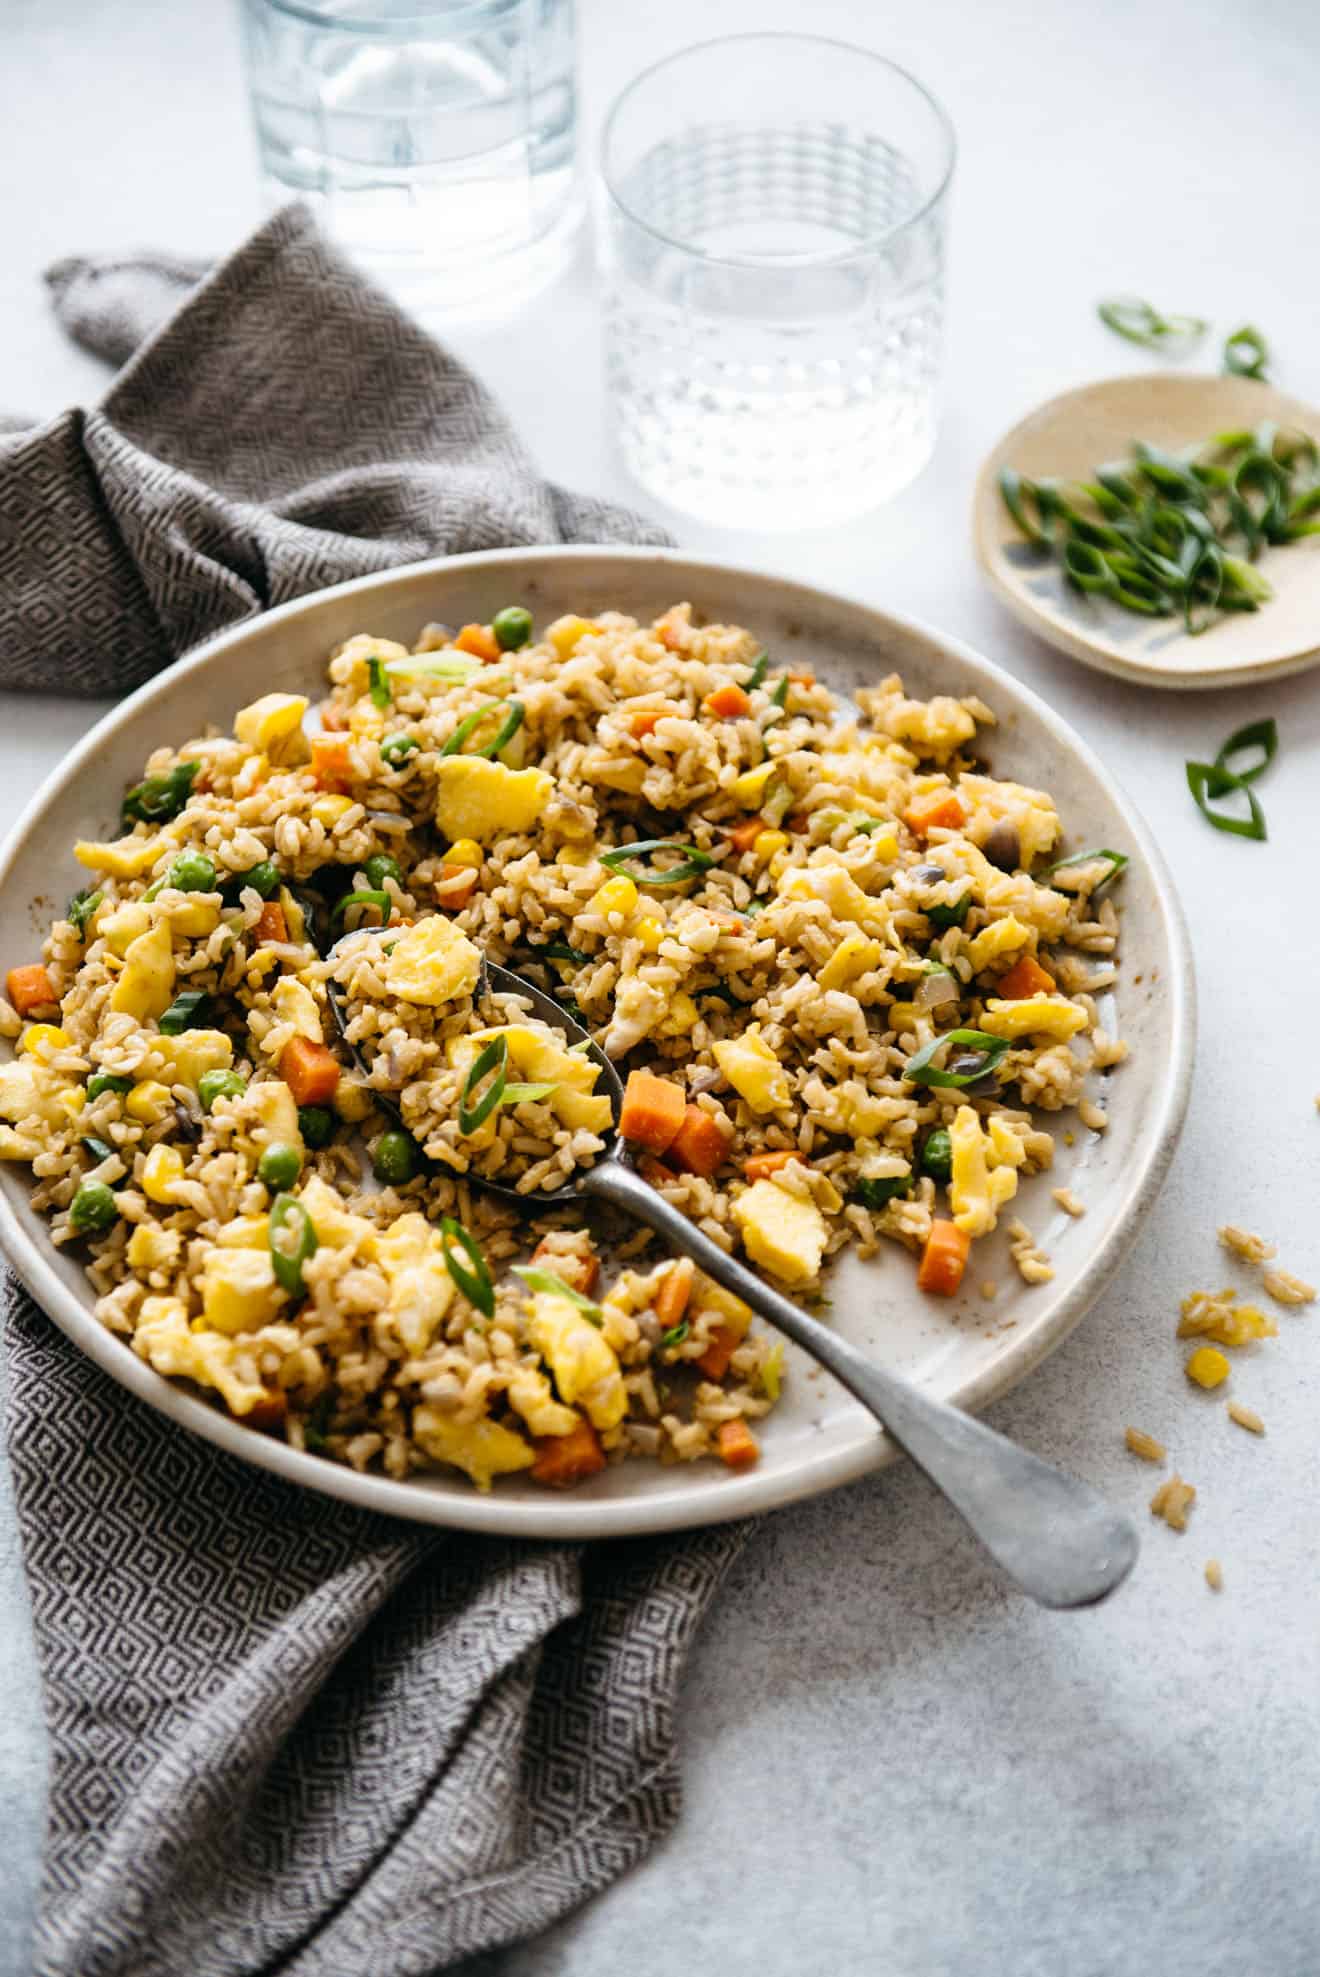 The Easiest Egg Fried Rice Recipe - a healthy, filling dinner ready in 15 minutes!